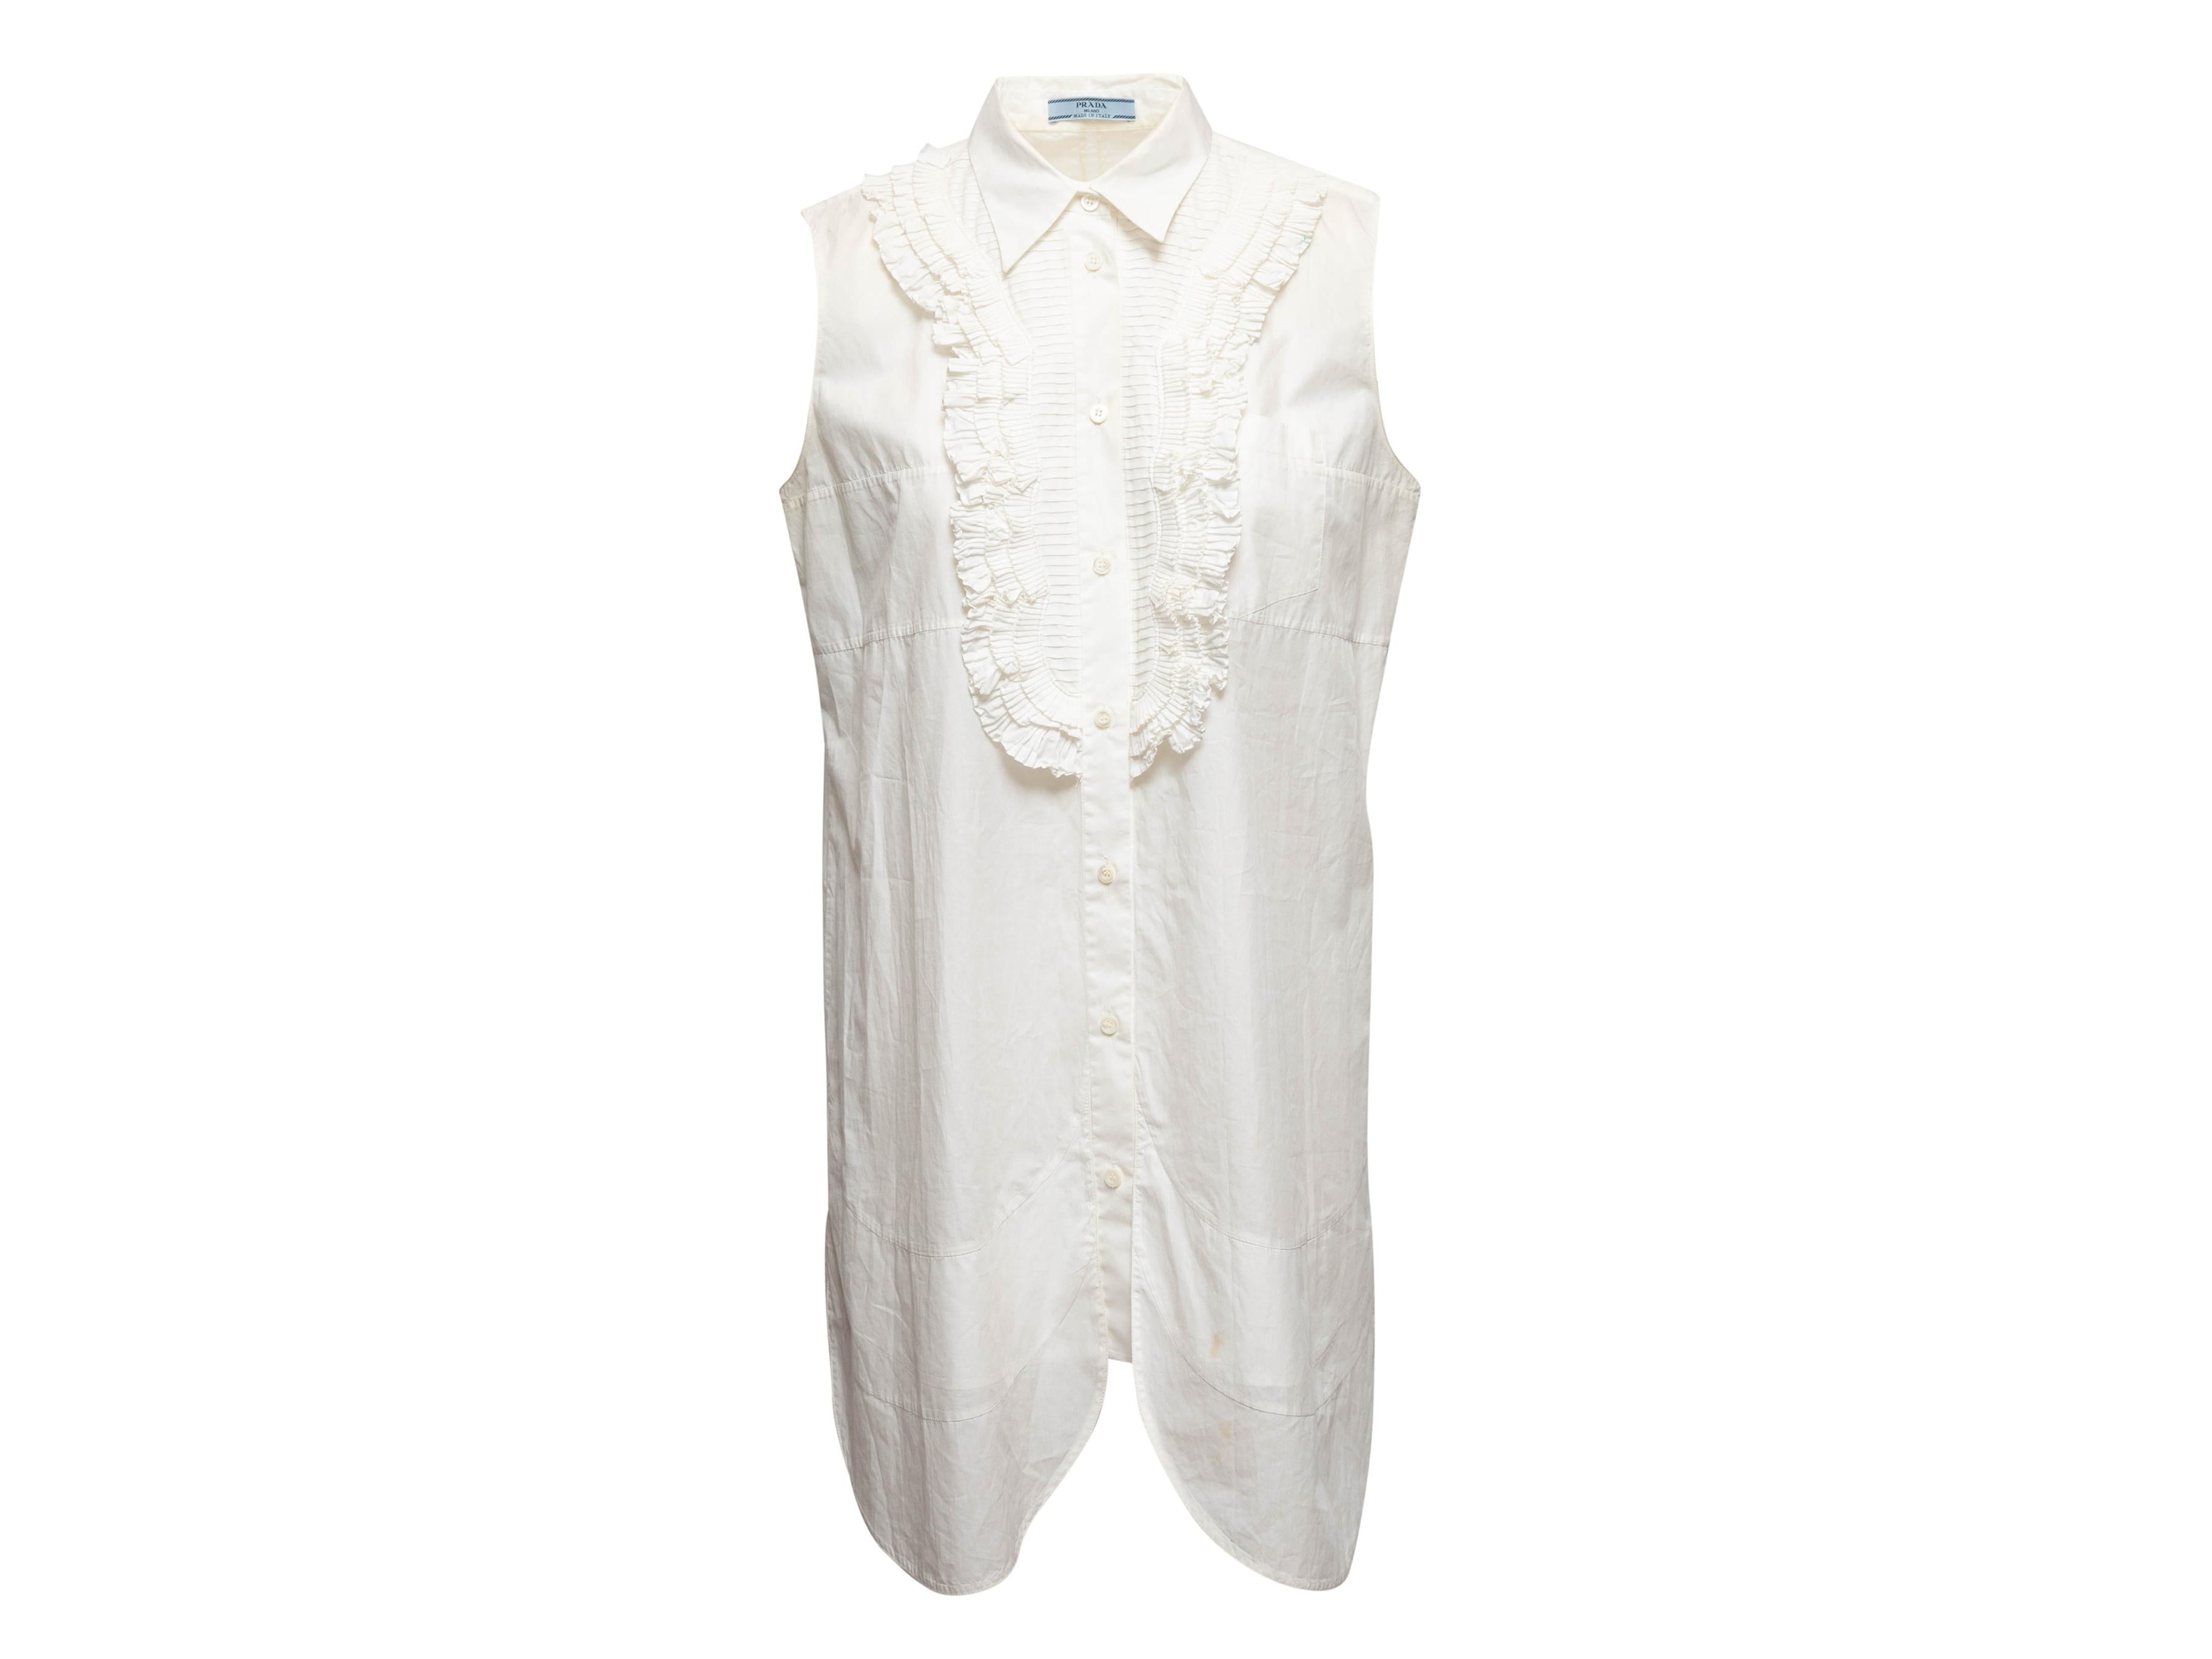 White sleeveless button-up dress by Prada. Pointed collar. Ruffle trim at front. Button closures at center front. 40